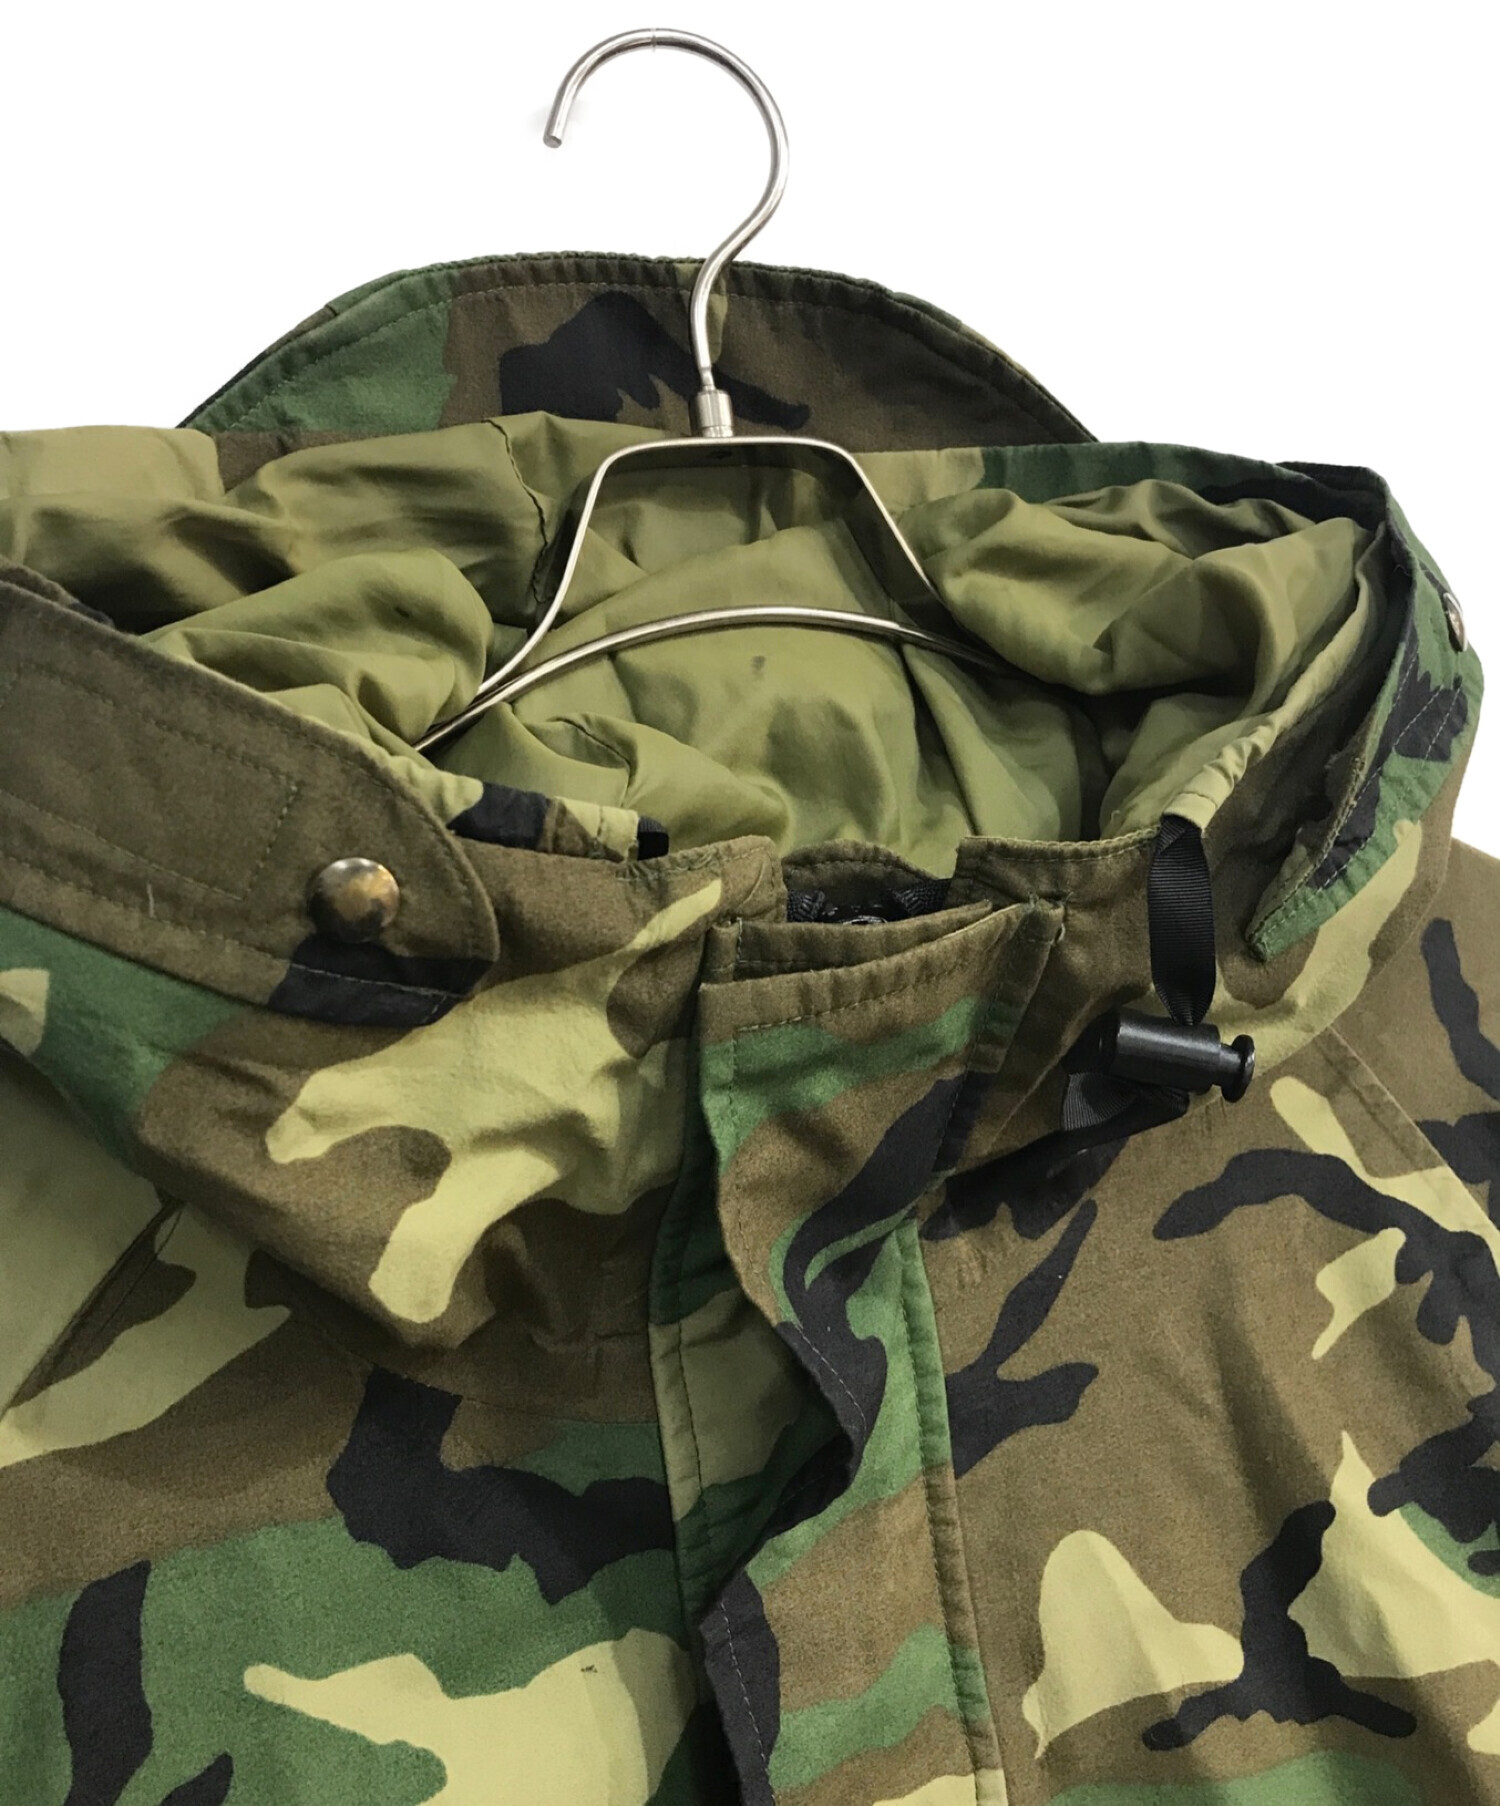 ECWCS GEN1 GORE-TEX CAMO PARKA　8415-01-228-13208415-01-228-1320　TENNESSEE  APPARL CORP製 PARKA, COLD WEATHER, CAMOUFLAGE